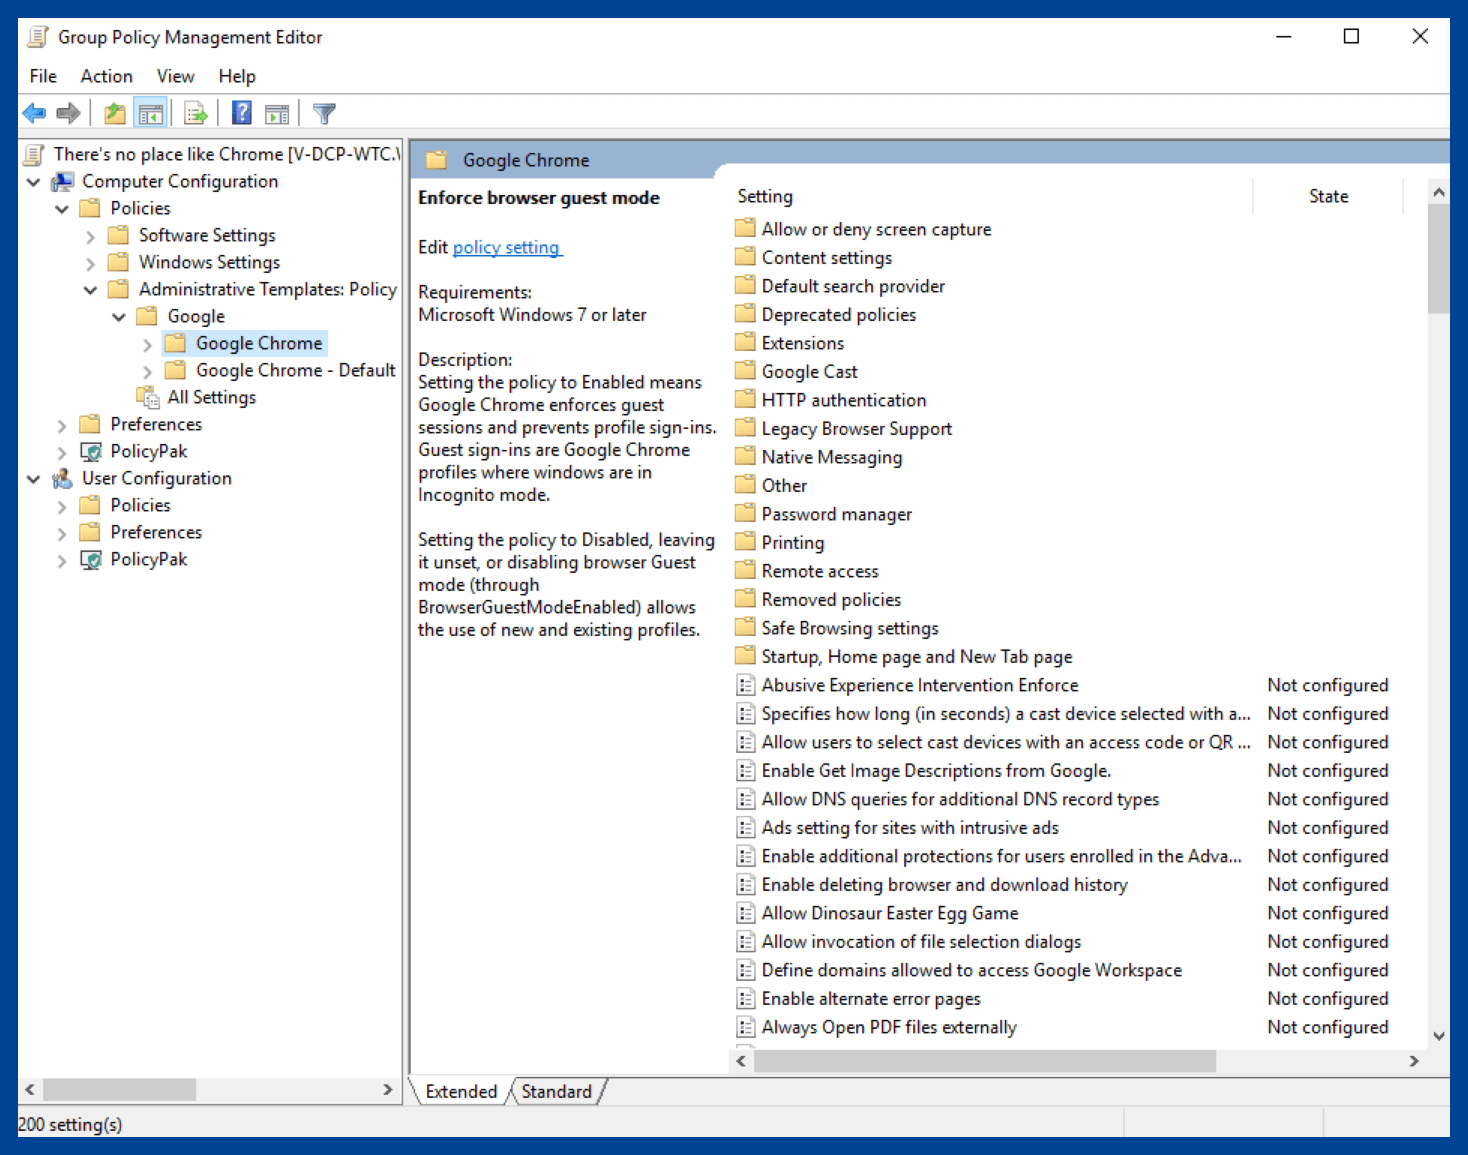 Navigate to the Google Chrome policies in the Group Policy Management Editor